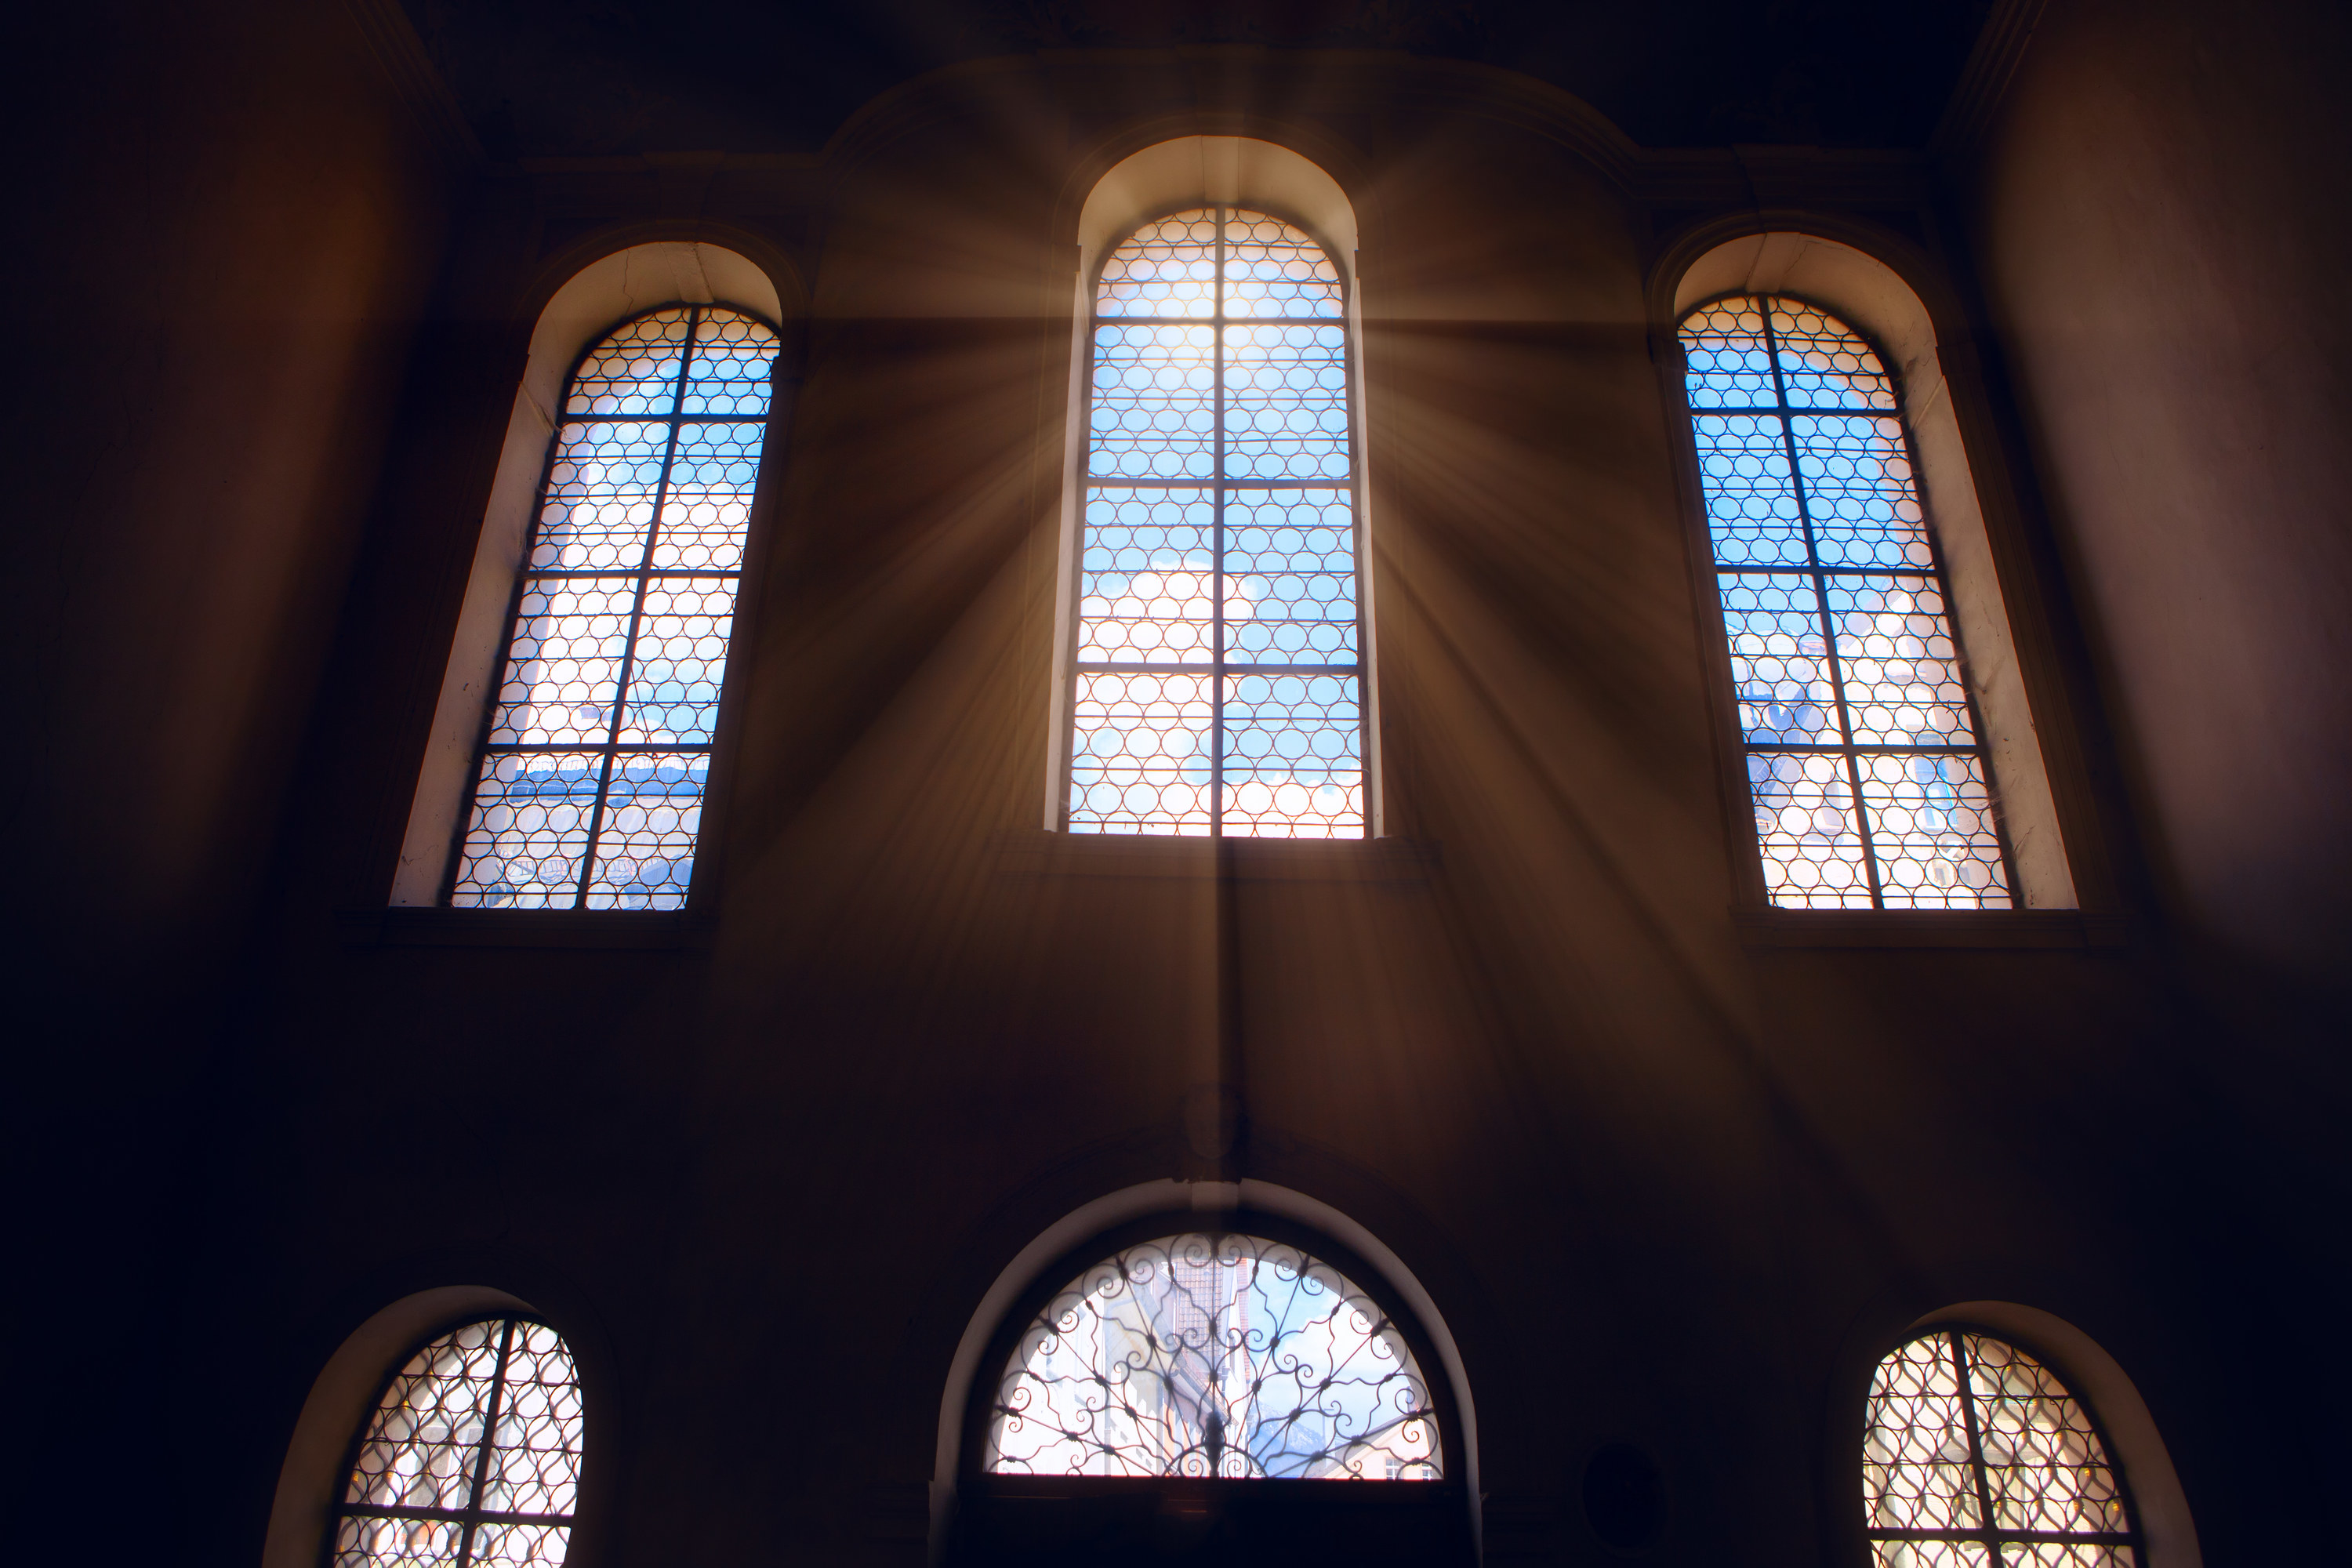 The interior of a church showing its church windows